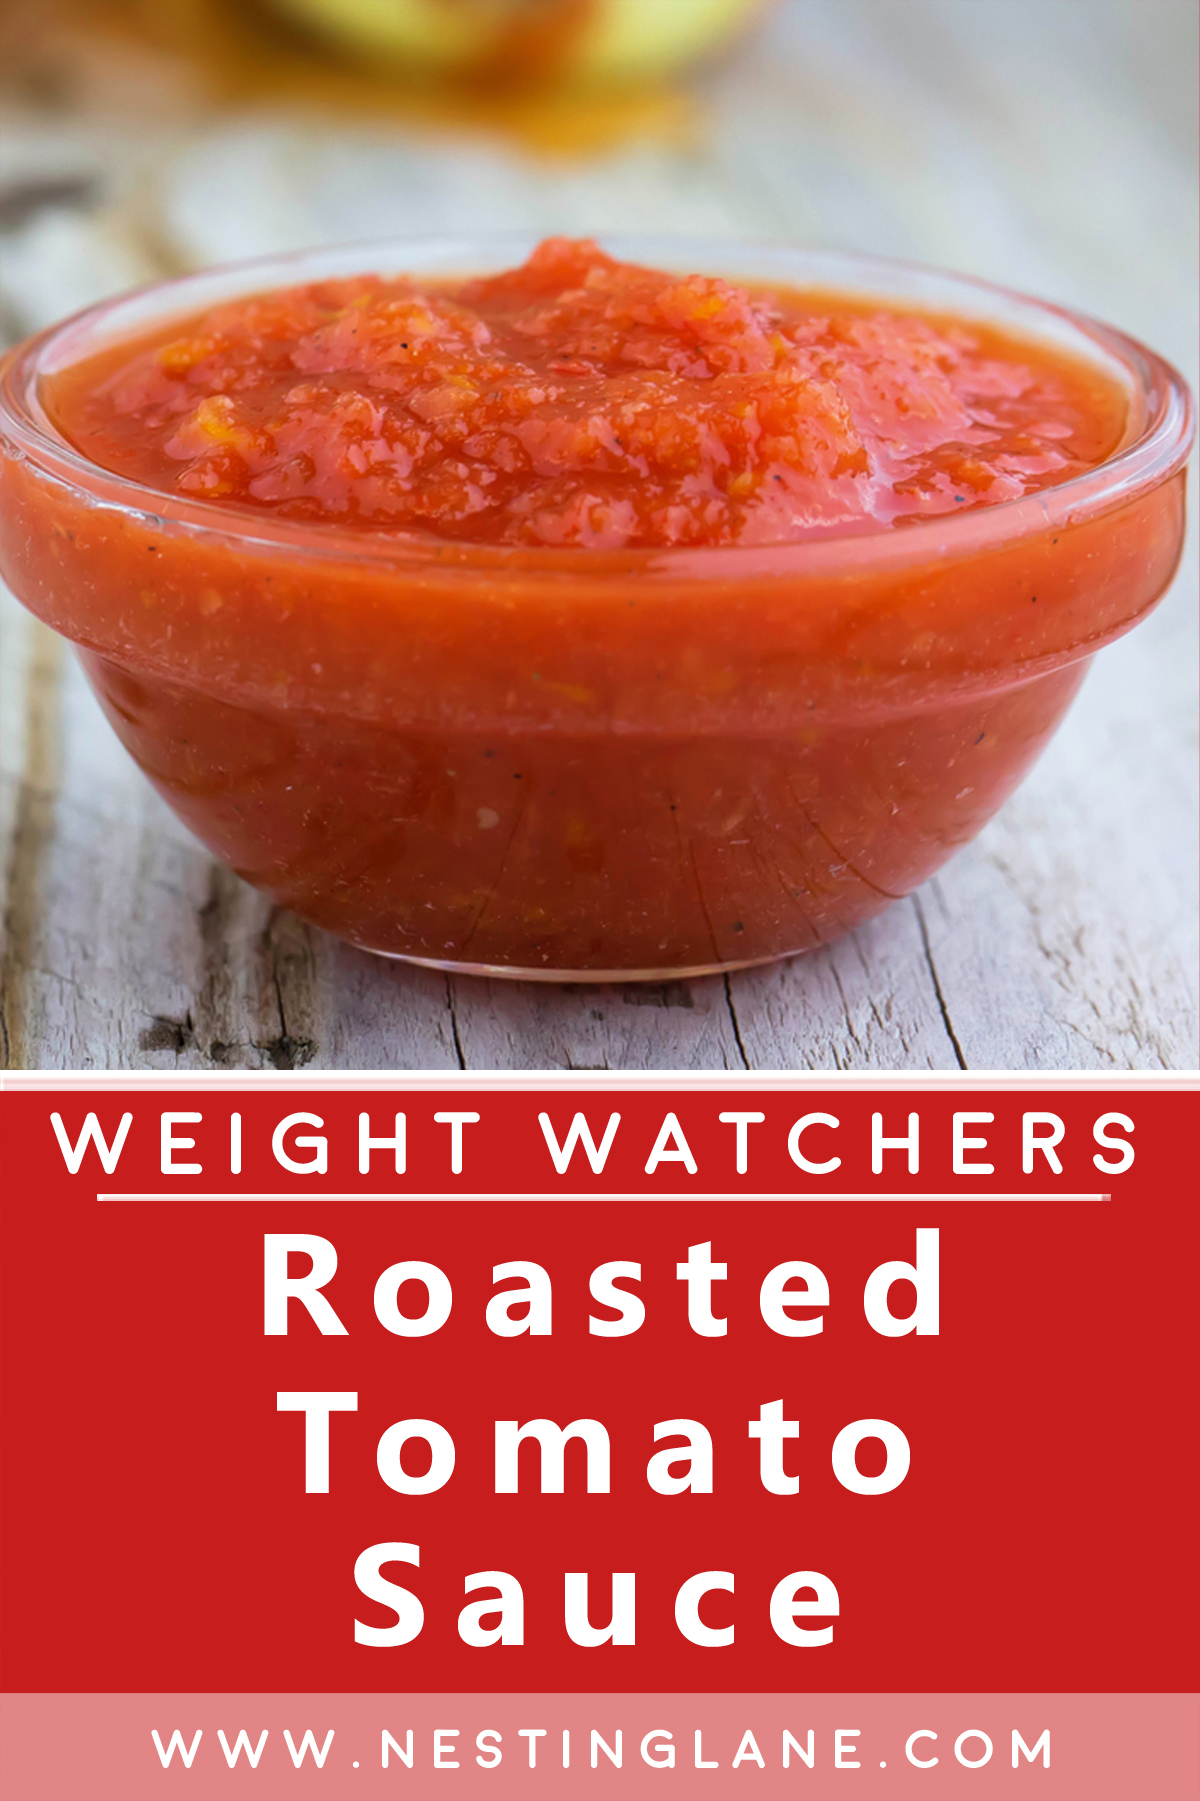 Graphic for Pinterest of Weight Watchers Roasted Tomato Sauce Recipe.